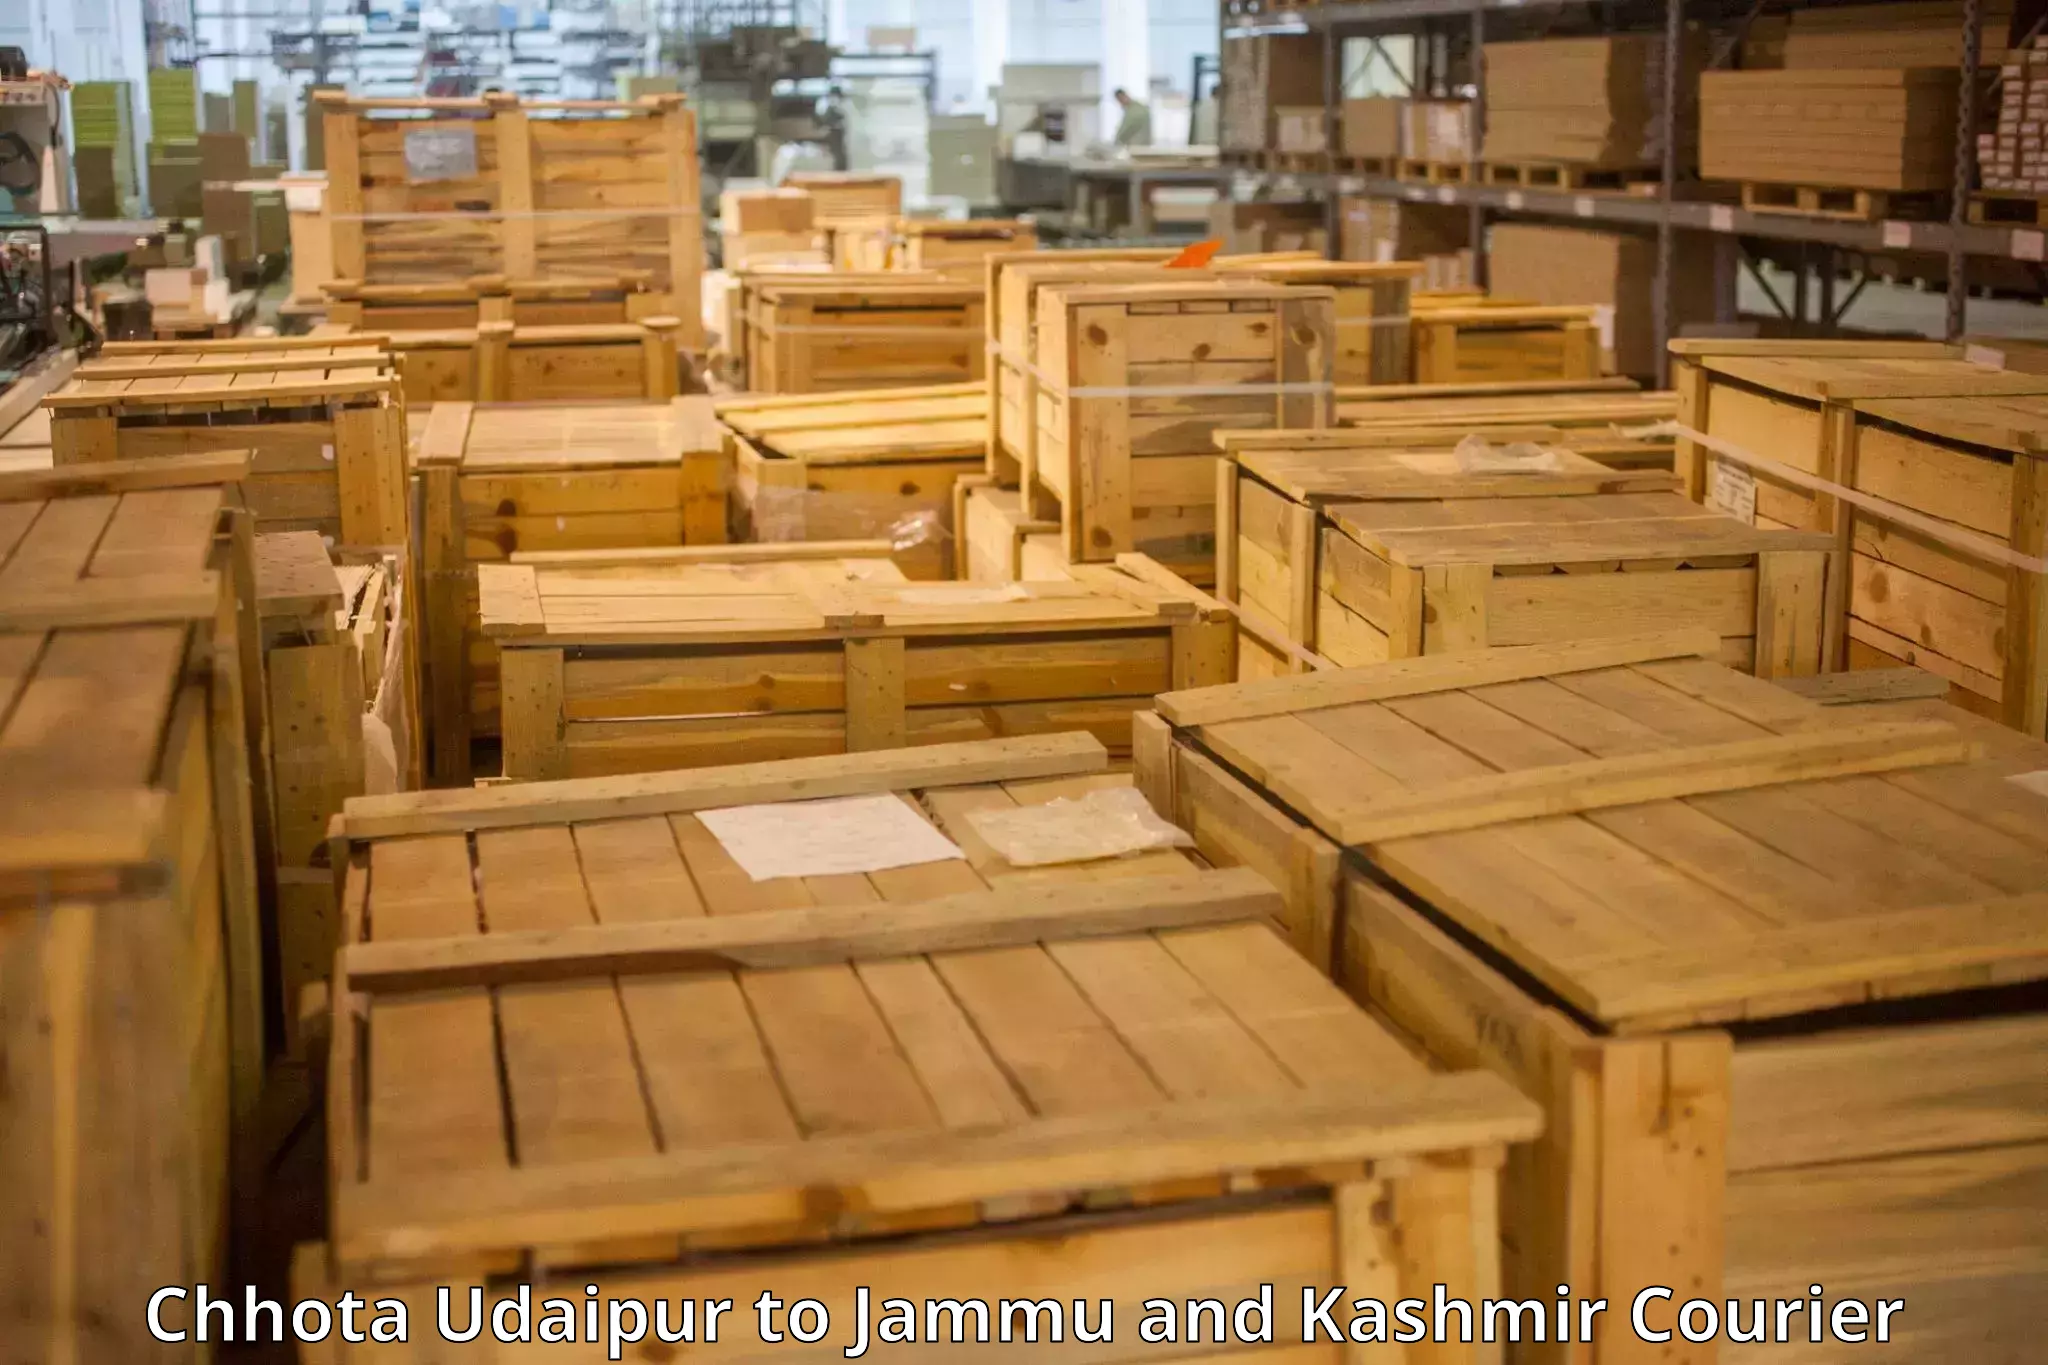 Baggage delivery technology in Chhota Udaipur to Jammu and Kashmir